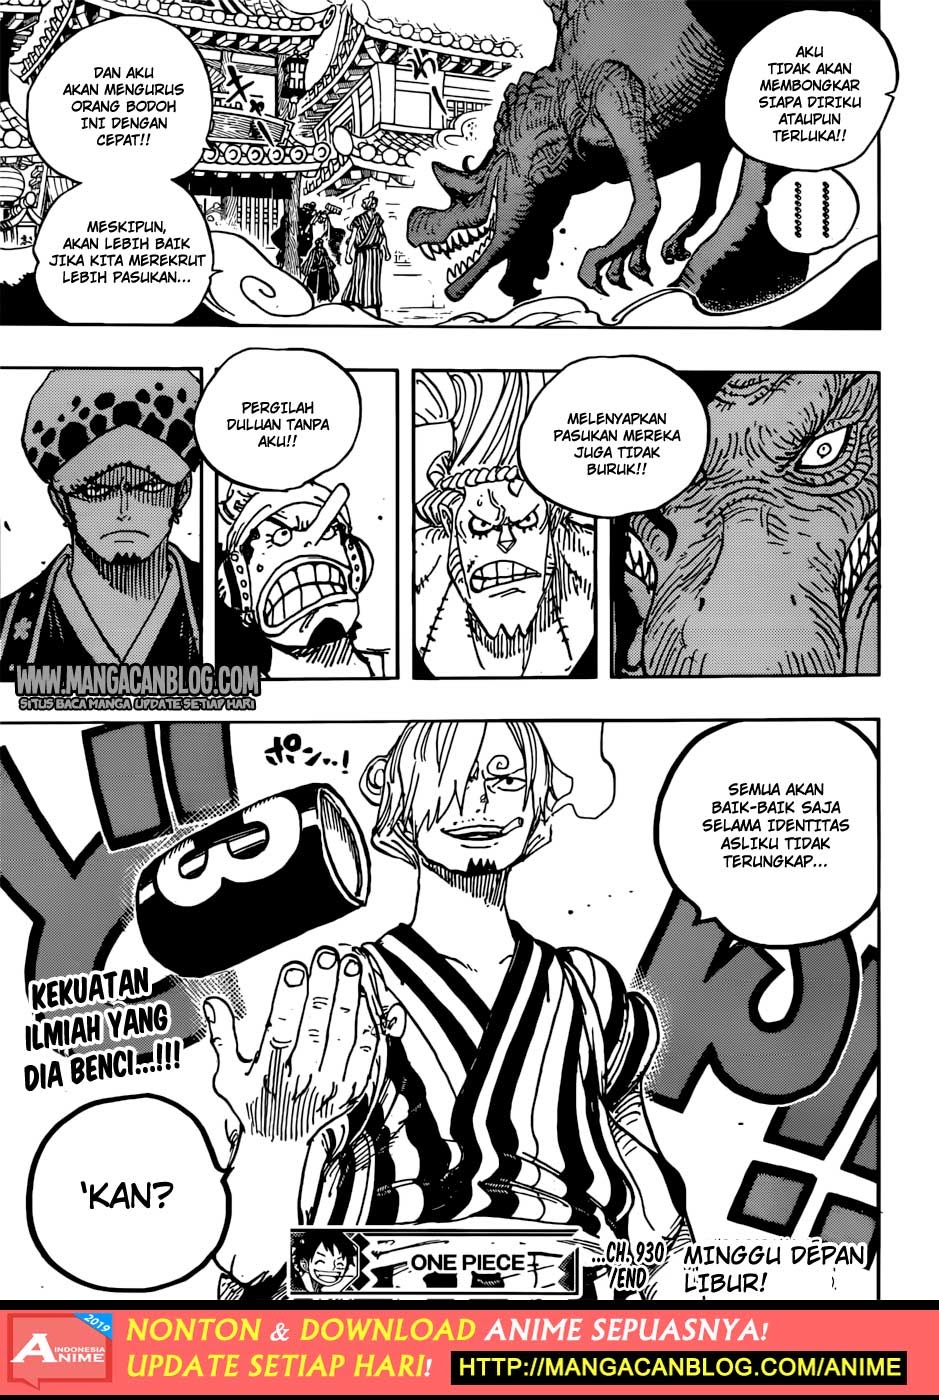 One Piece Chapter 930 indo Image 14